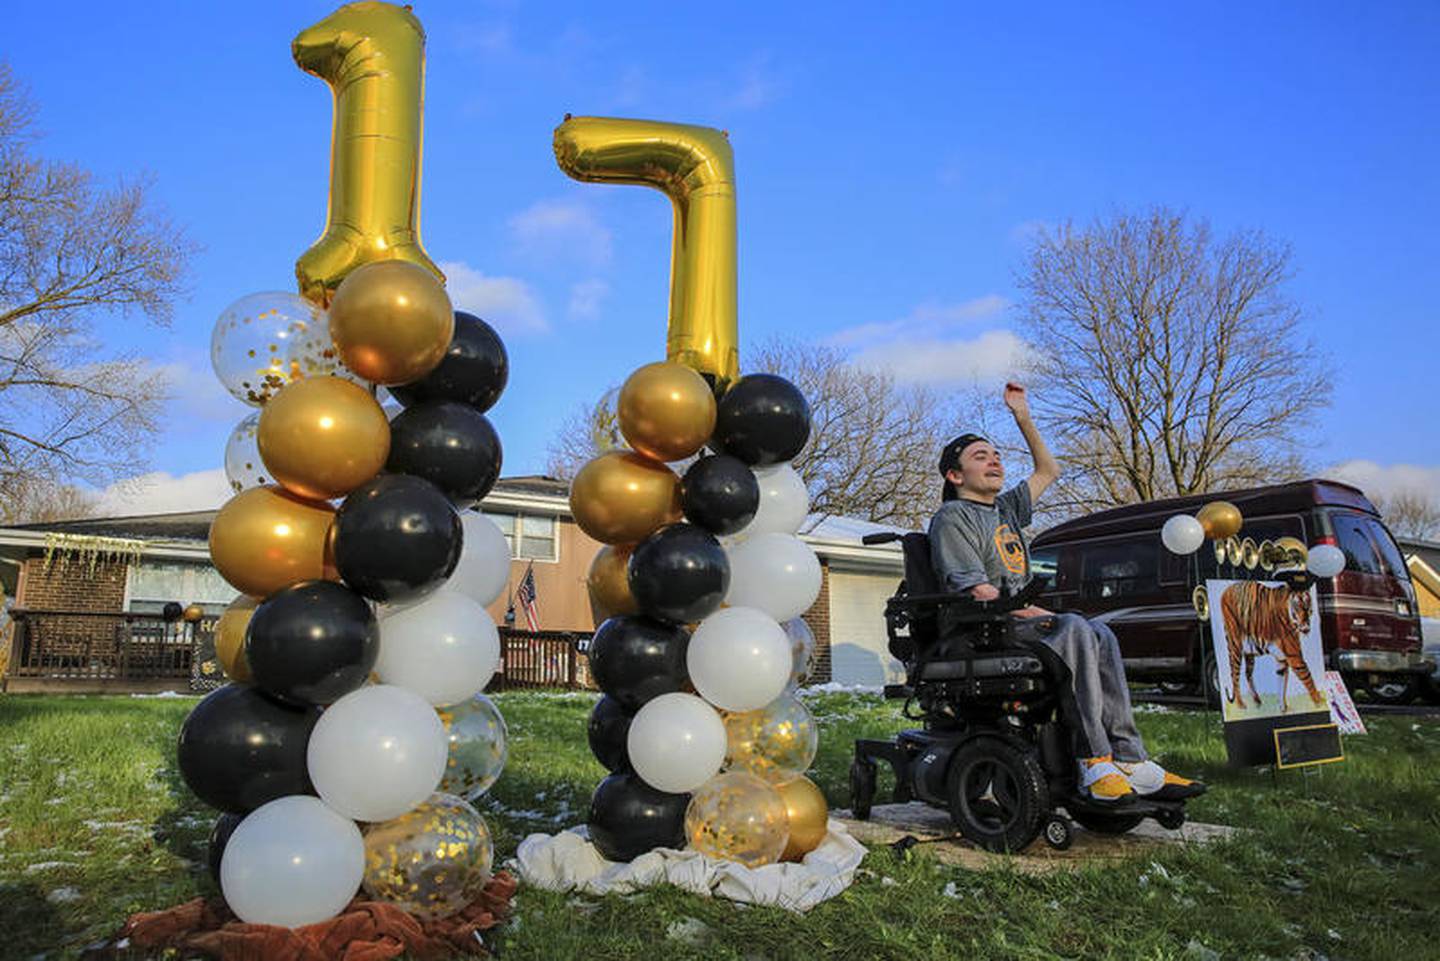 "She had the yard decorated really nice," Lawson Sizemore said. "She went all out on it. It was beautiful."

Then Lawson heard the cars honking. About 50 family, friends and Joliet west students and staff drove by his Shorewood house to wish him a happy 17th birthday.